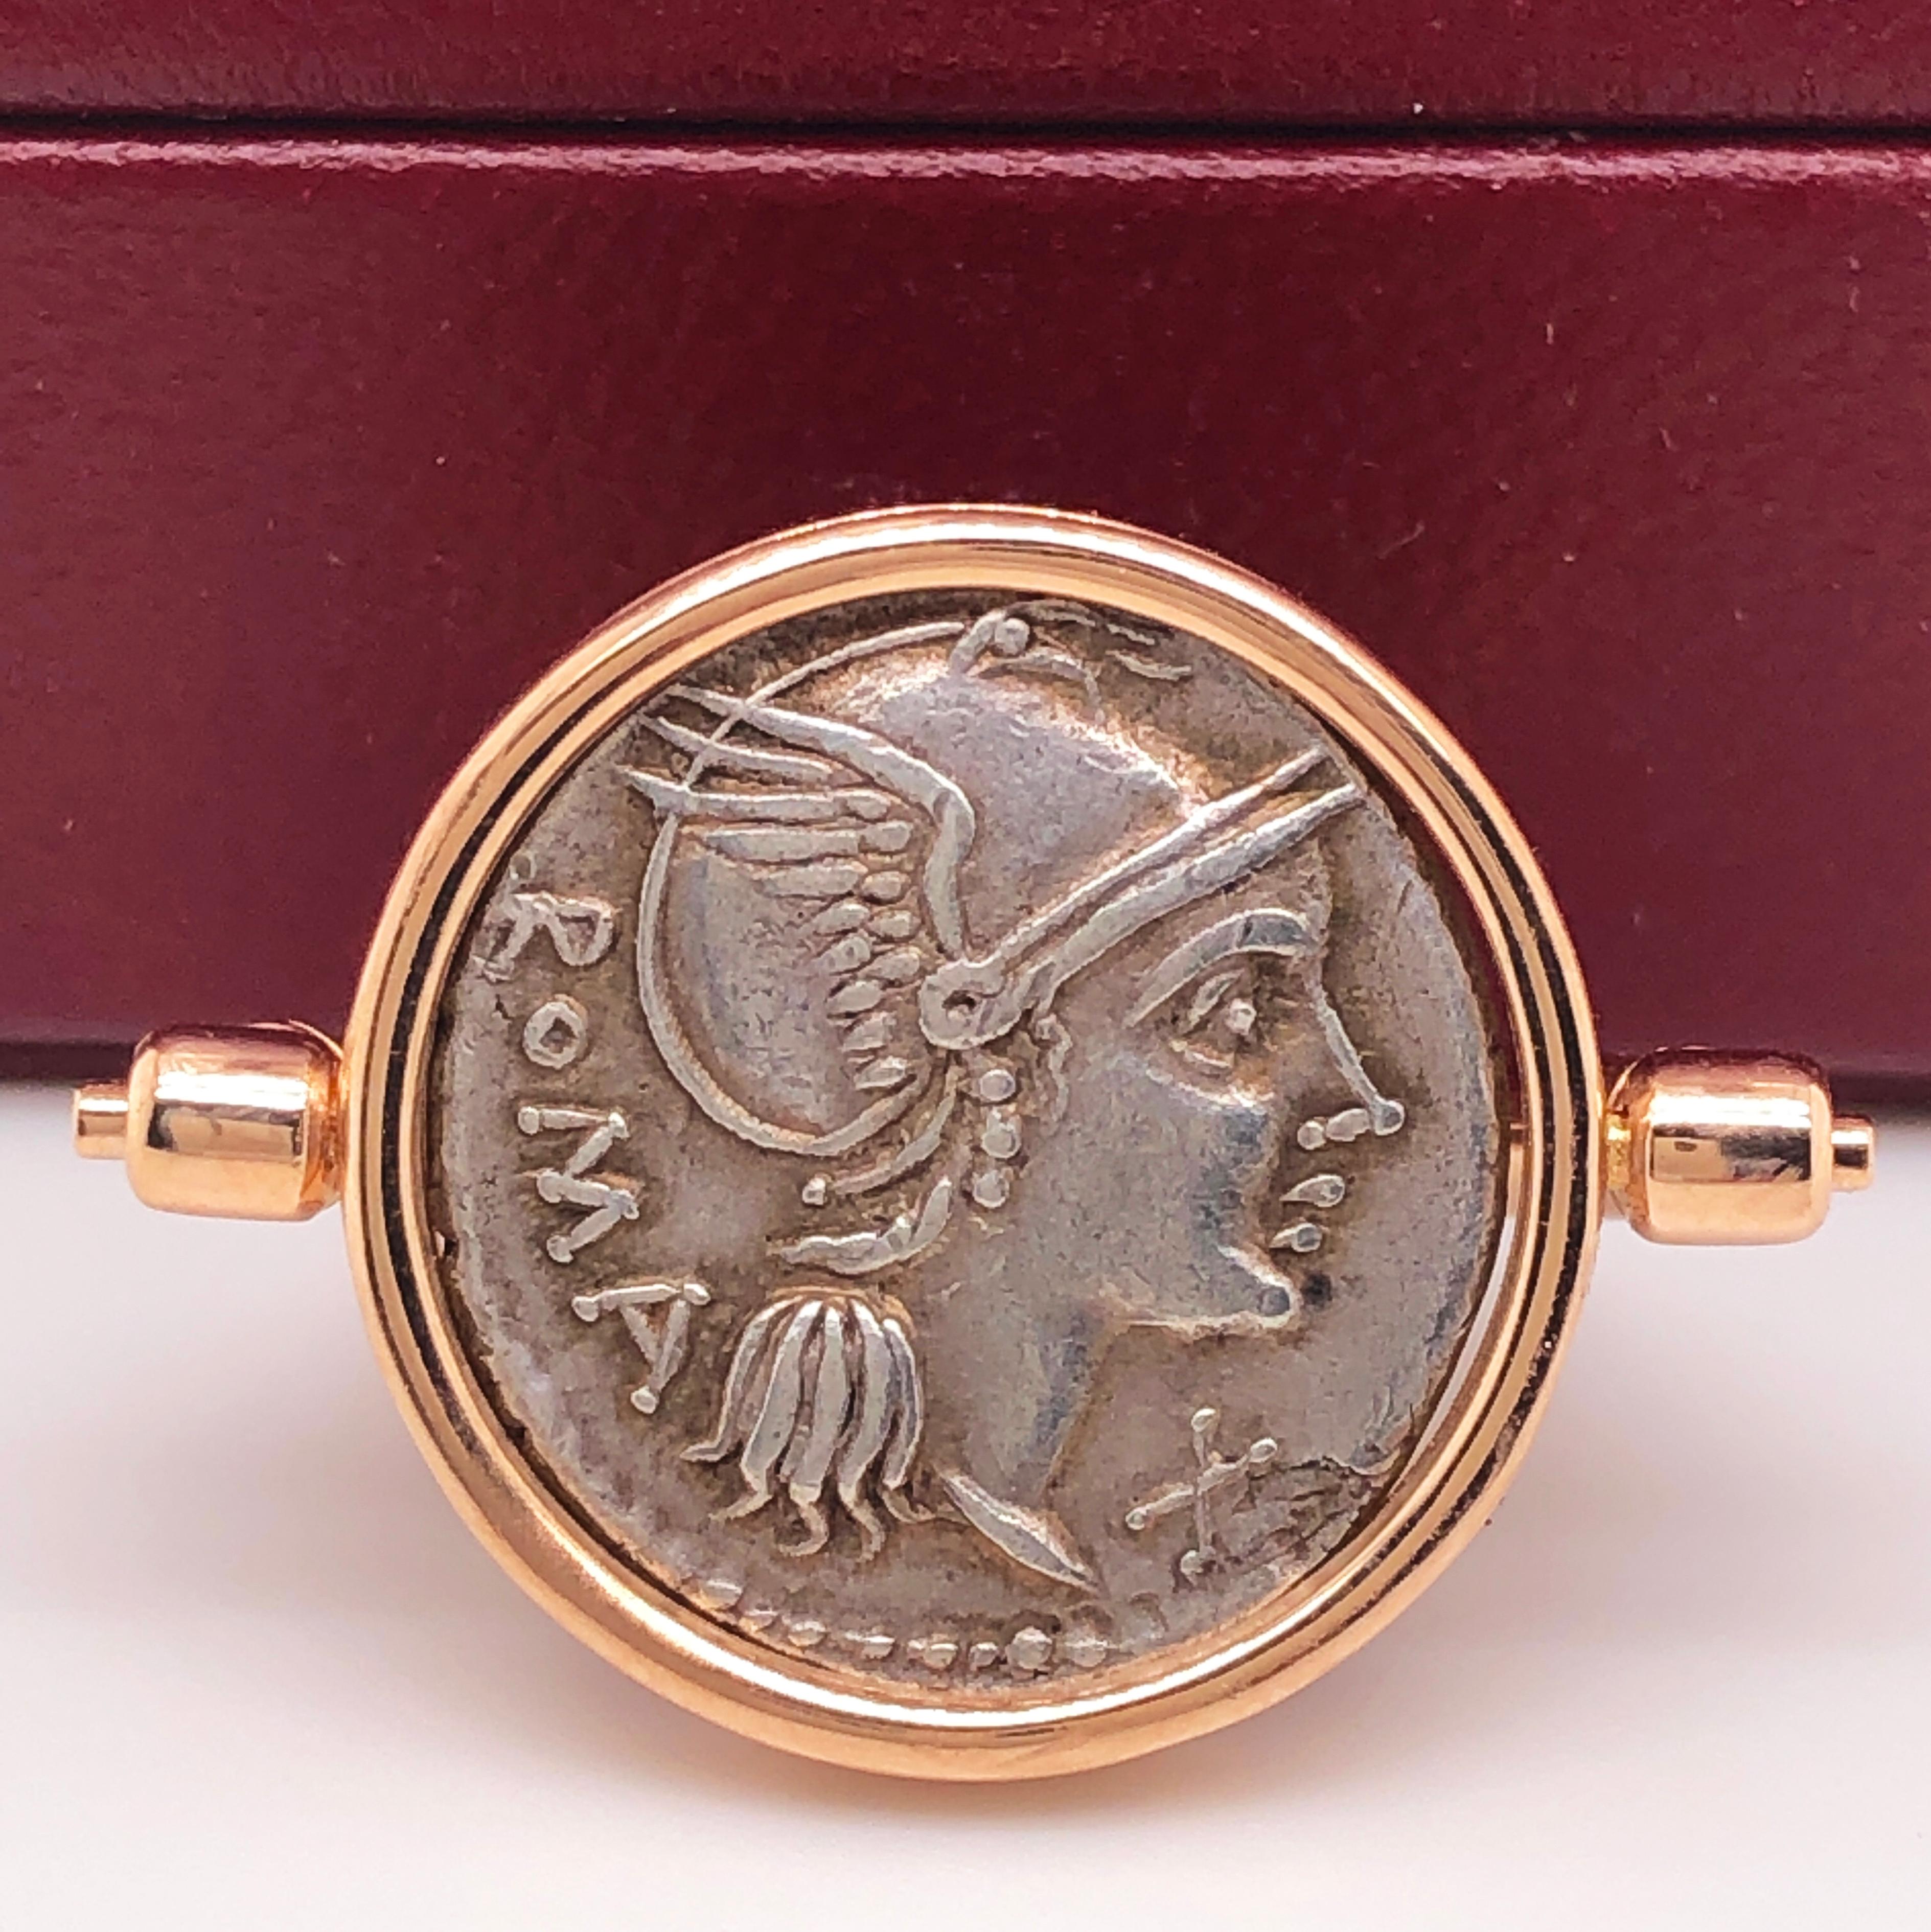 Original and One-of-a-kind 109-108 B.C. Gens Flaminia Silver Coin(DENARIO) featuring on the front Roma's Head wearing a Helmet and Victoria Dea on a Chariot on the back in an 18Kt Rose Gold Rotating Setting. Gens Flaminia (one of the most important